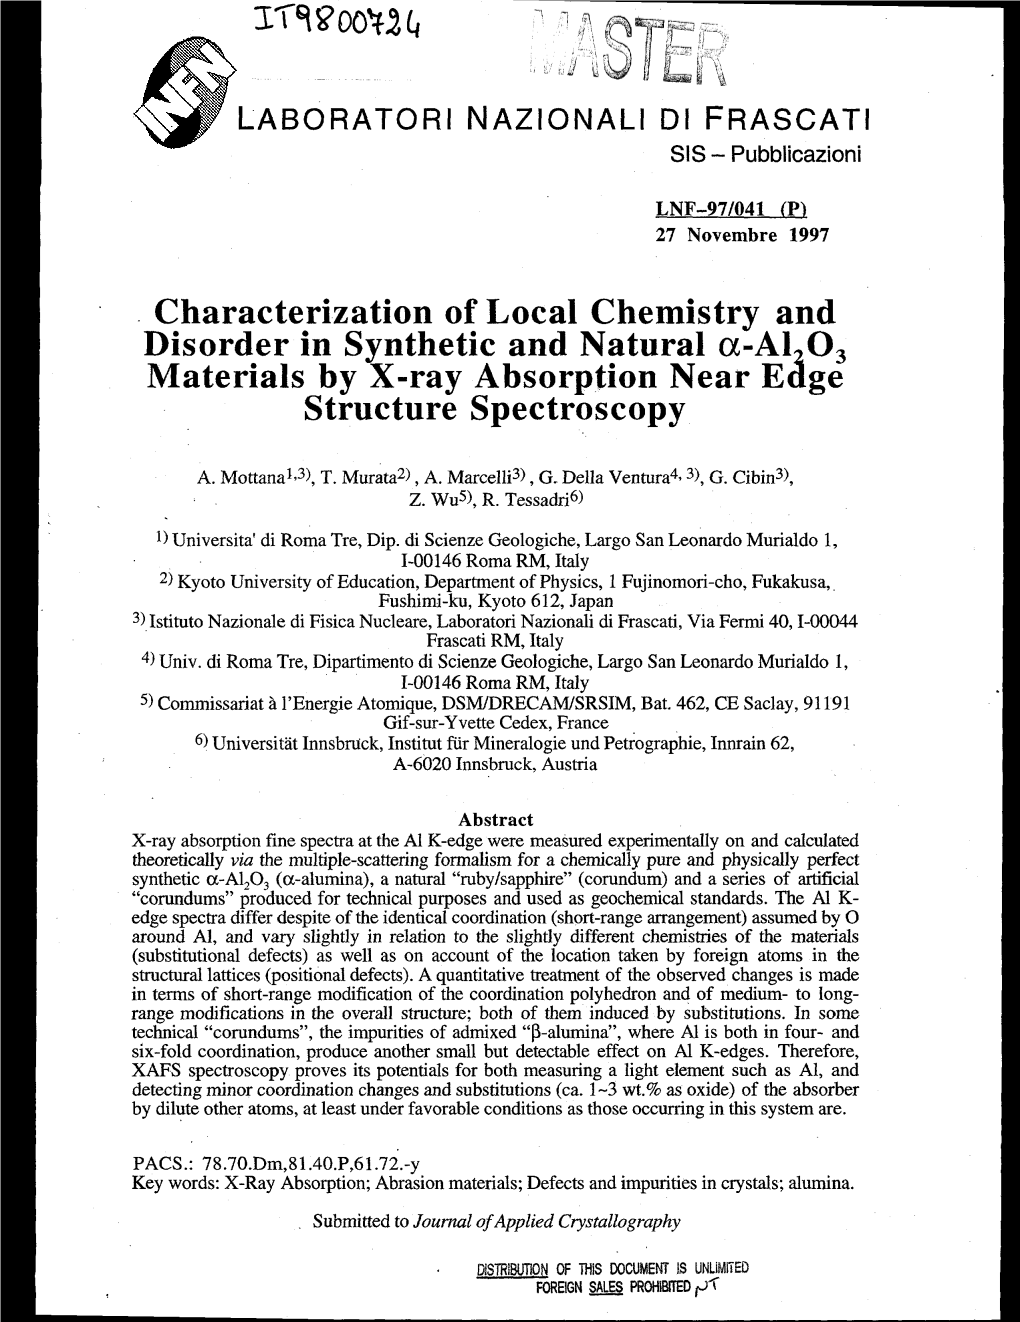 Characterization of Local Chemistry and Disorder in Synthetic and Natural A-AL03 Materials by X-Ray Absorption Near Edge Structure Spectroscopy